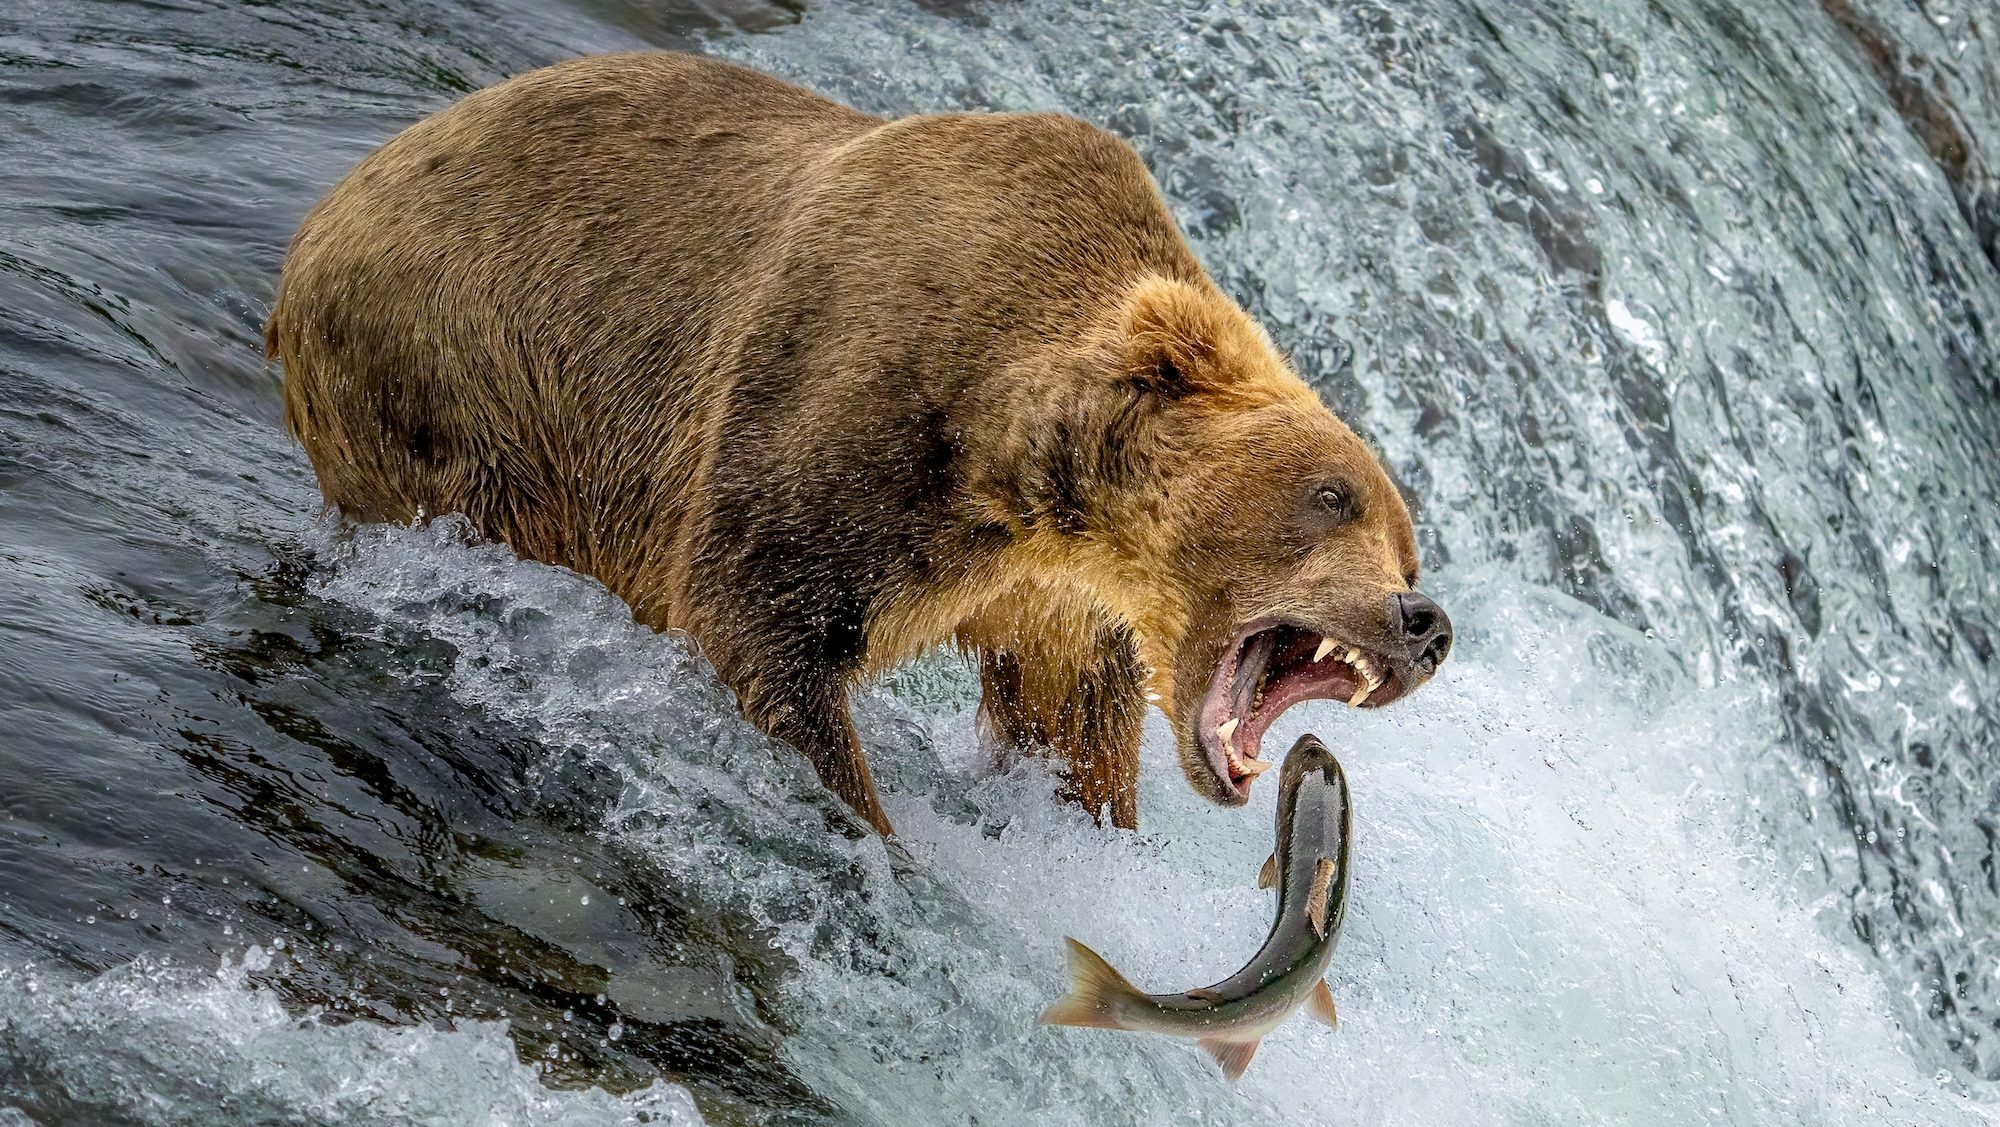 bear lunging with open jaws at a fish